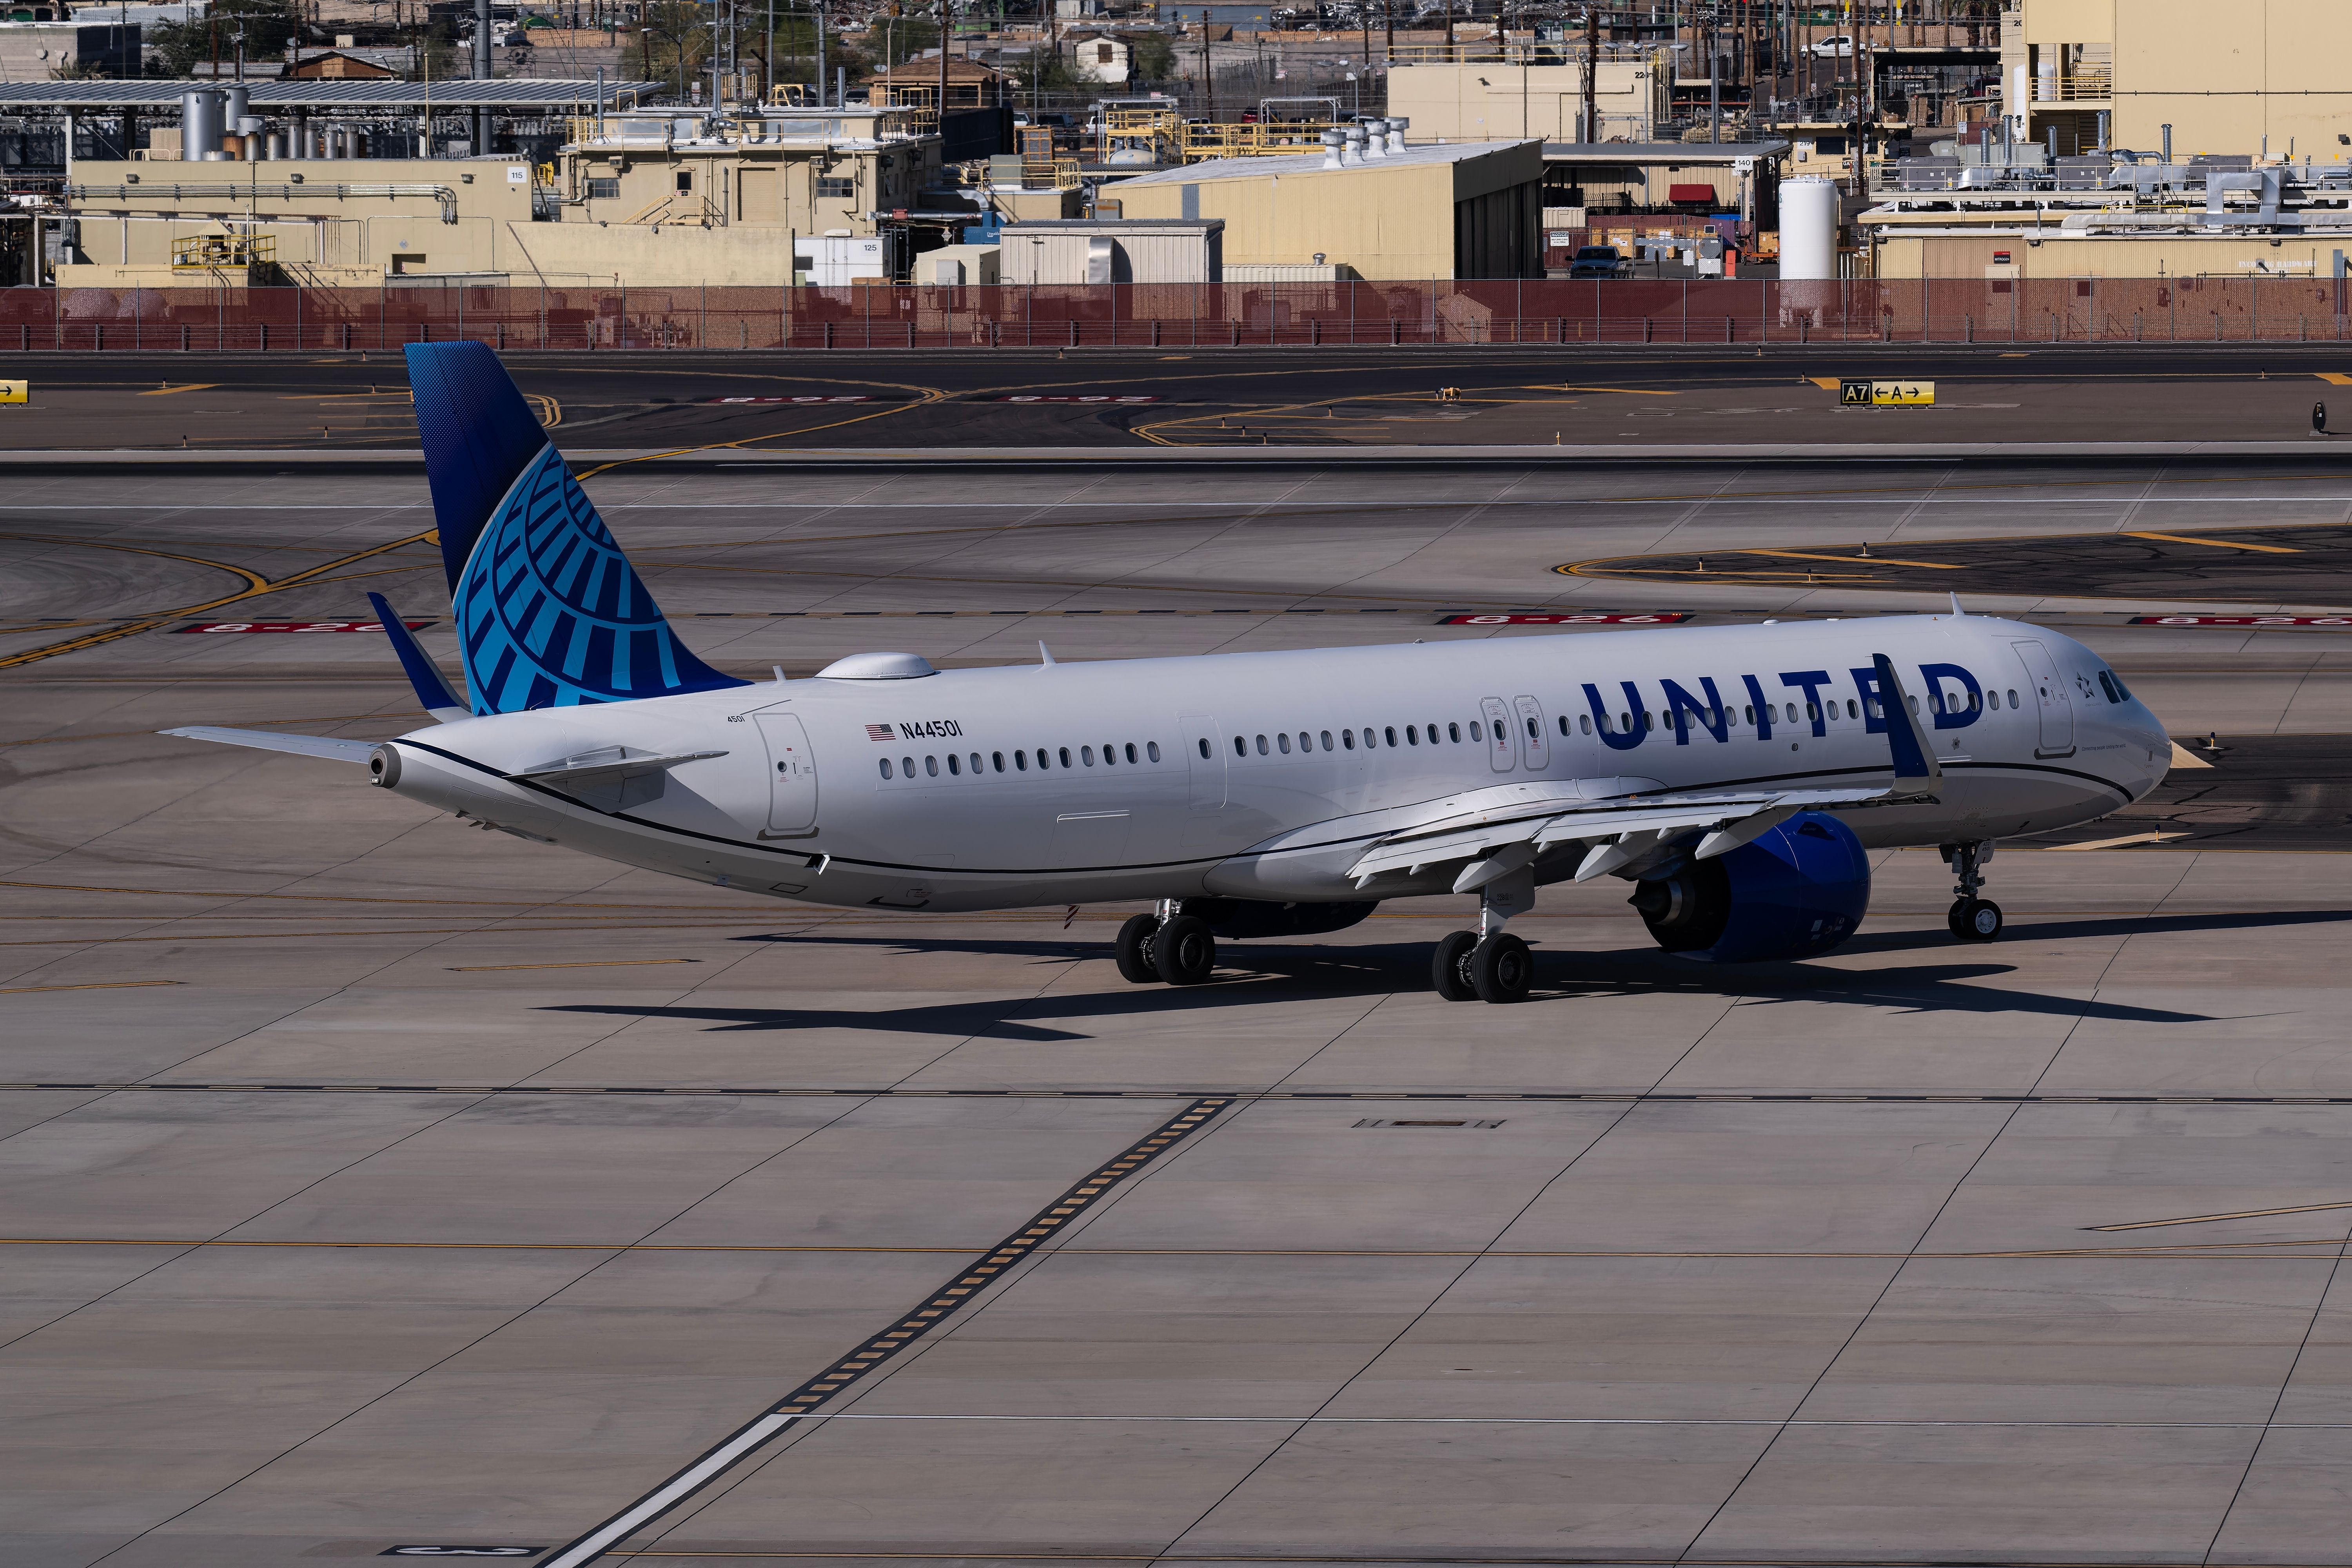 United Airlines Airbus A321neo (N44501) taxiing at Phoenix Sky Harbor International Airport.